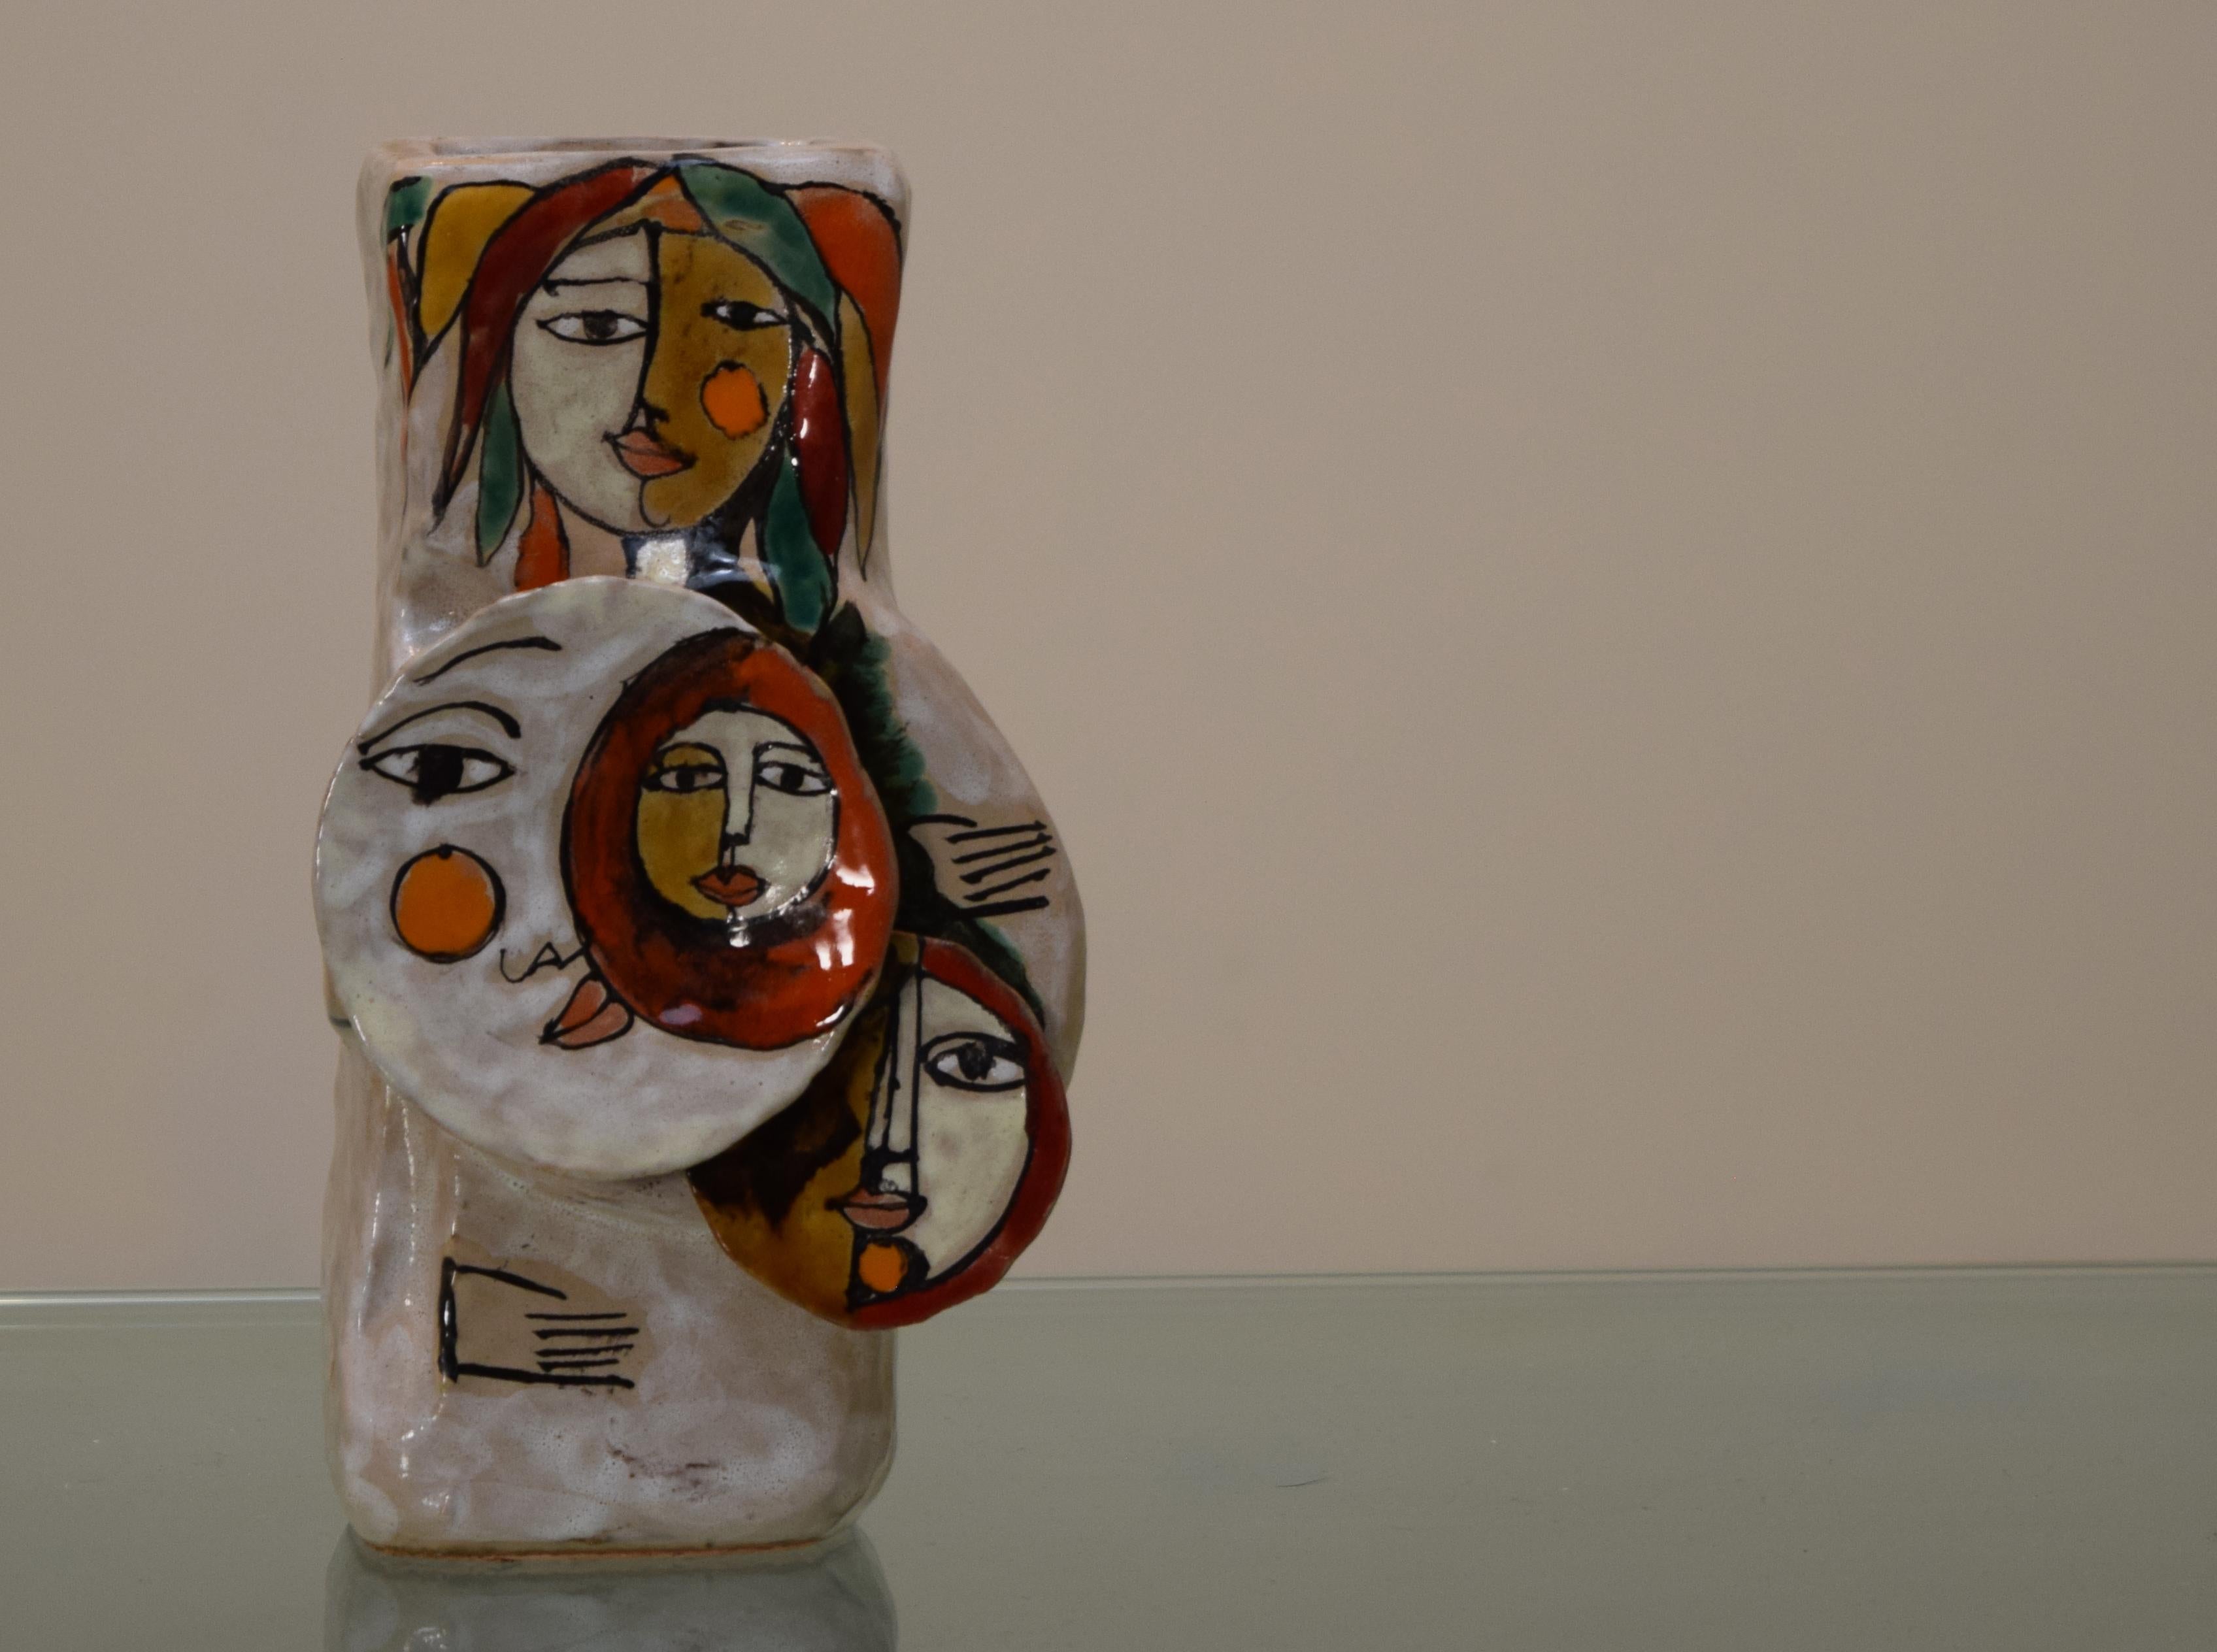 Italy. A beautiful studio hand built constructivist hi-glaze figurative sculptural ceramic vase by Elio Schiavon, circa 1960s. One of his most unique pieces depicting women in several layers of relief and not unlike similar styles expressed by Roger